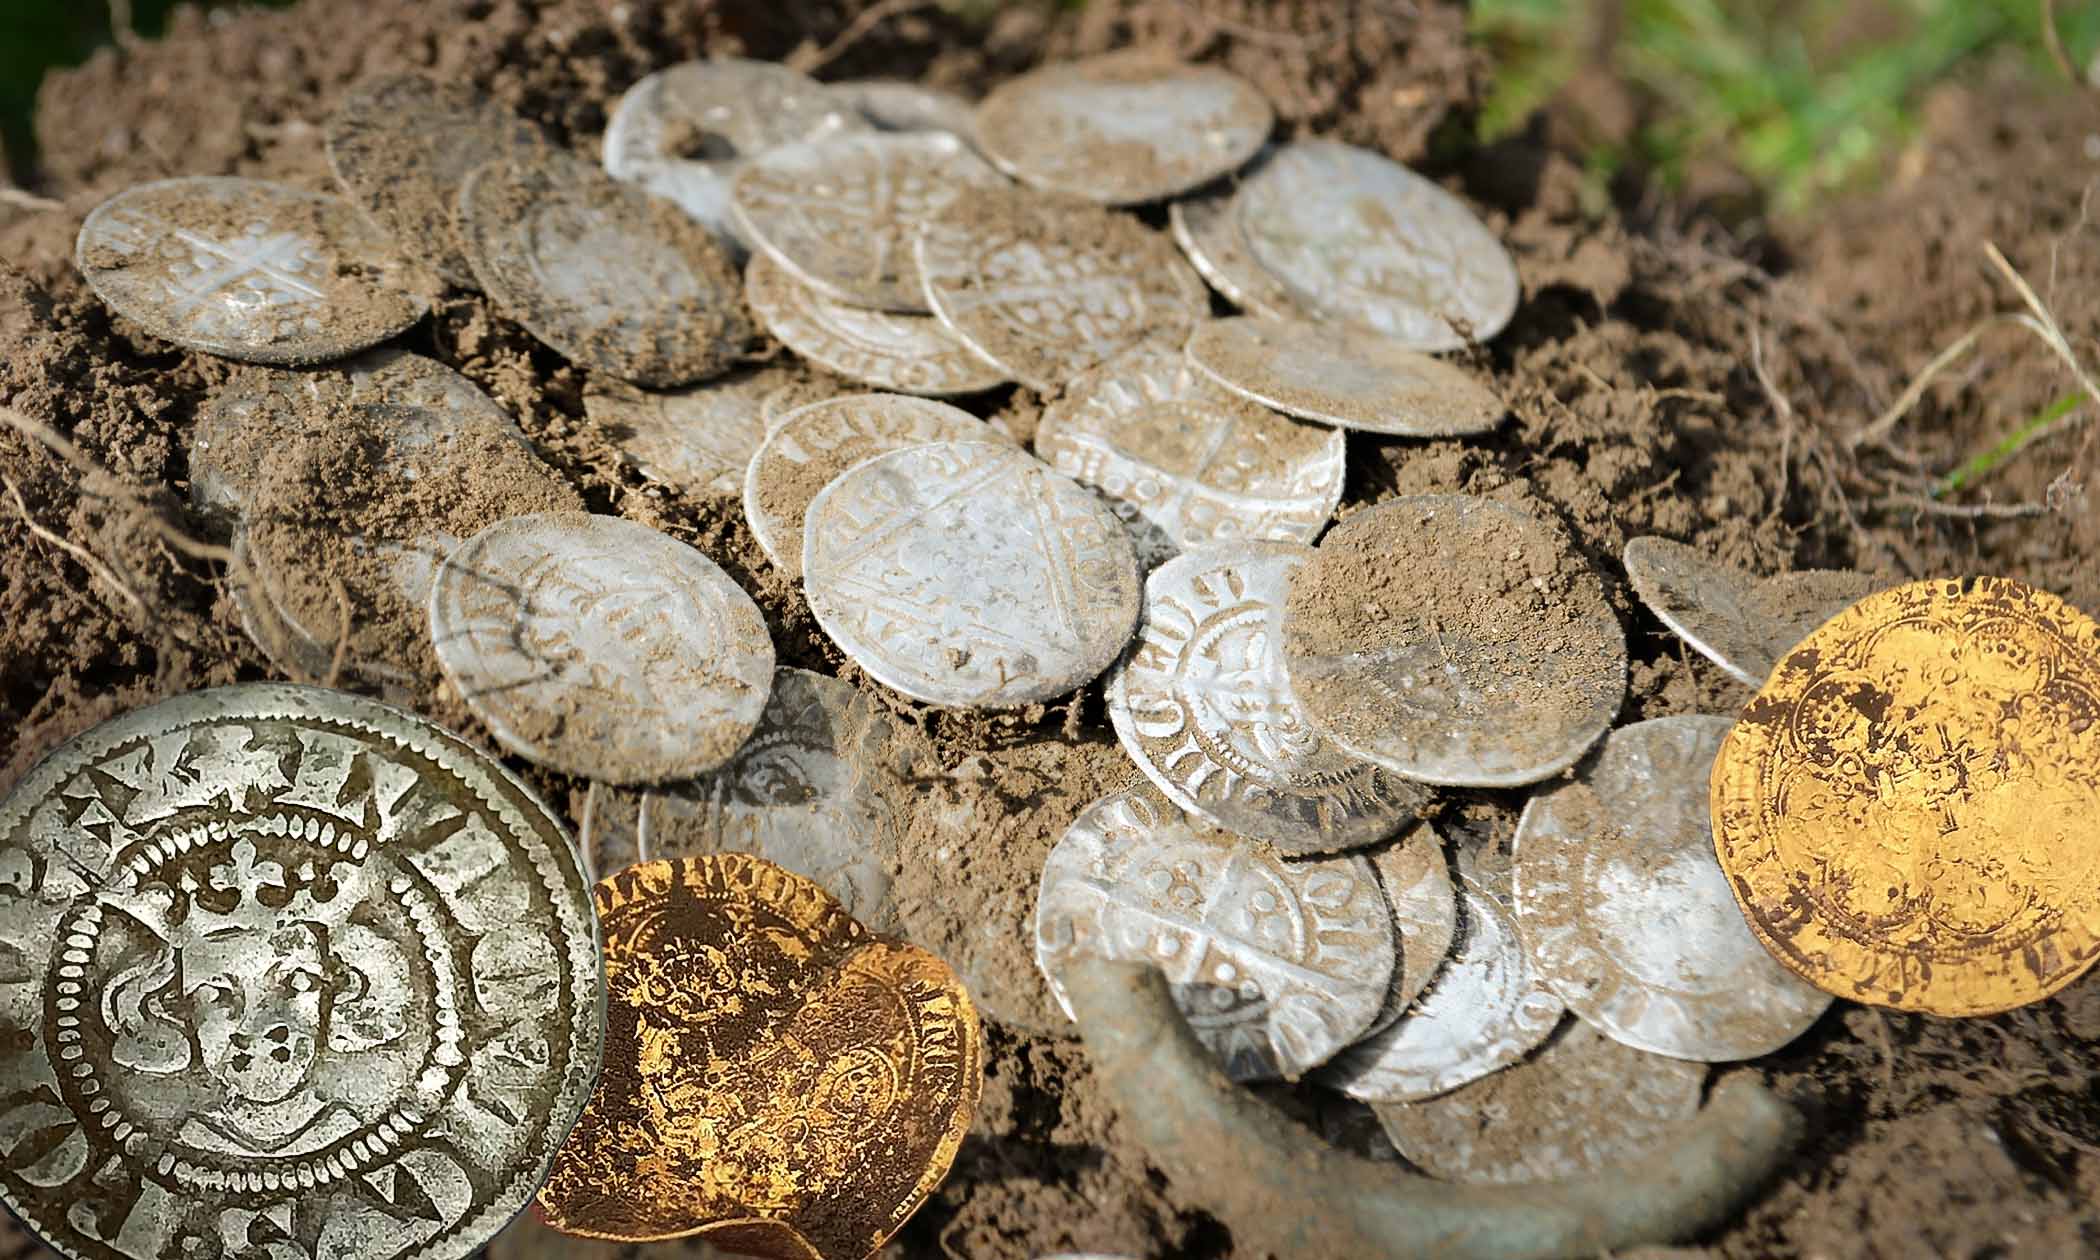 Treasure hoard of American and Russian gold coins found in Polish forest